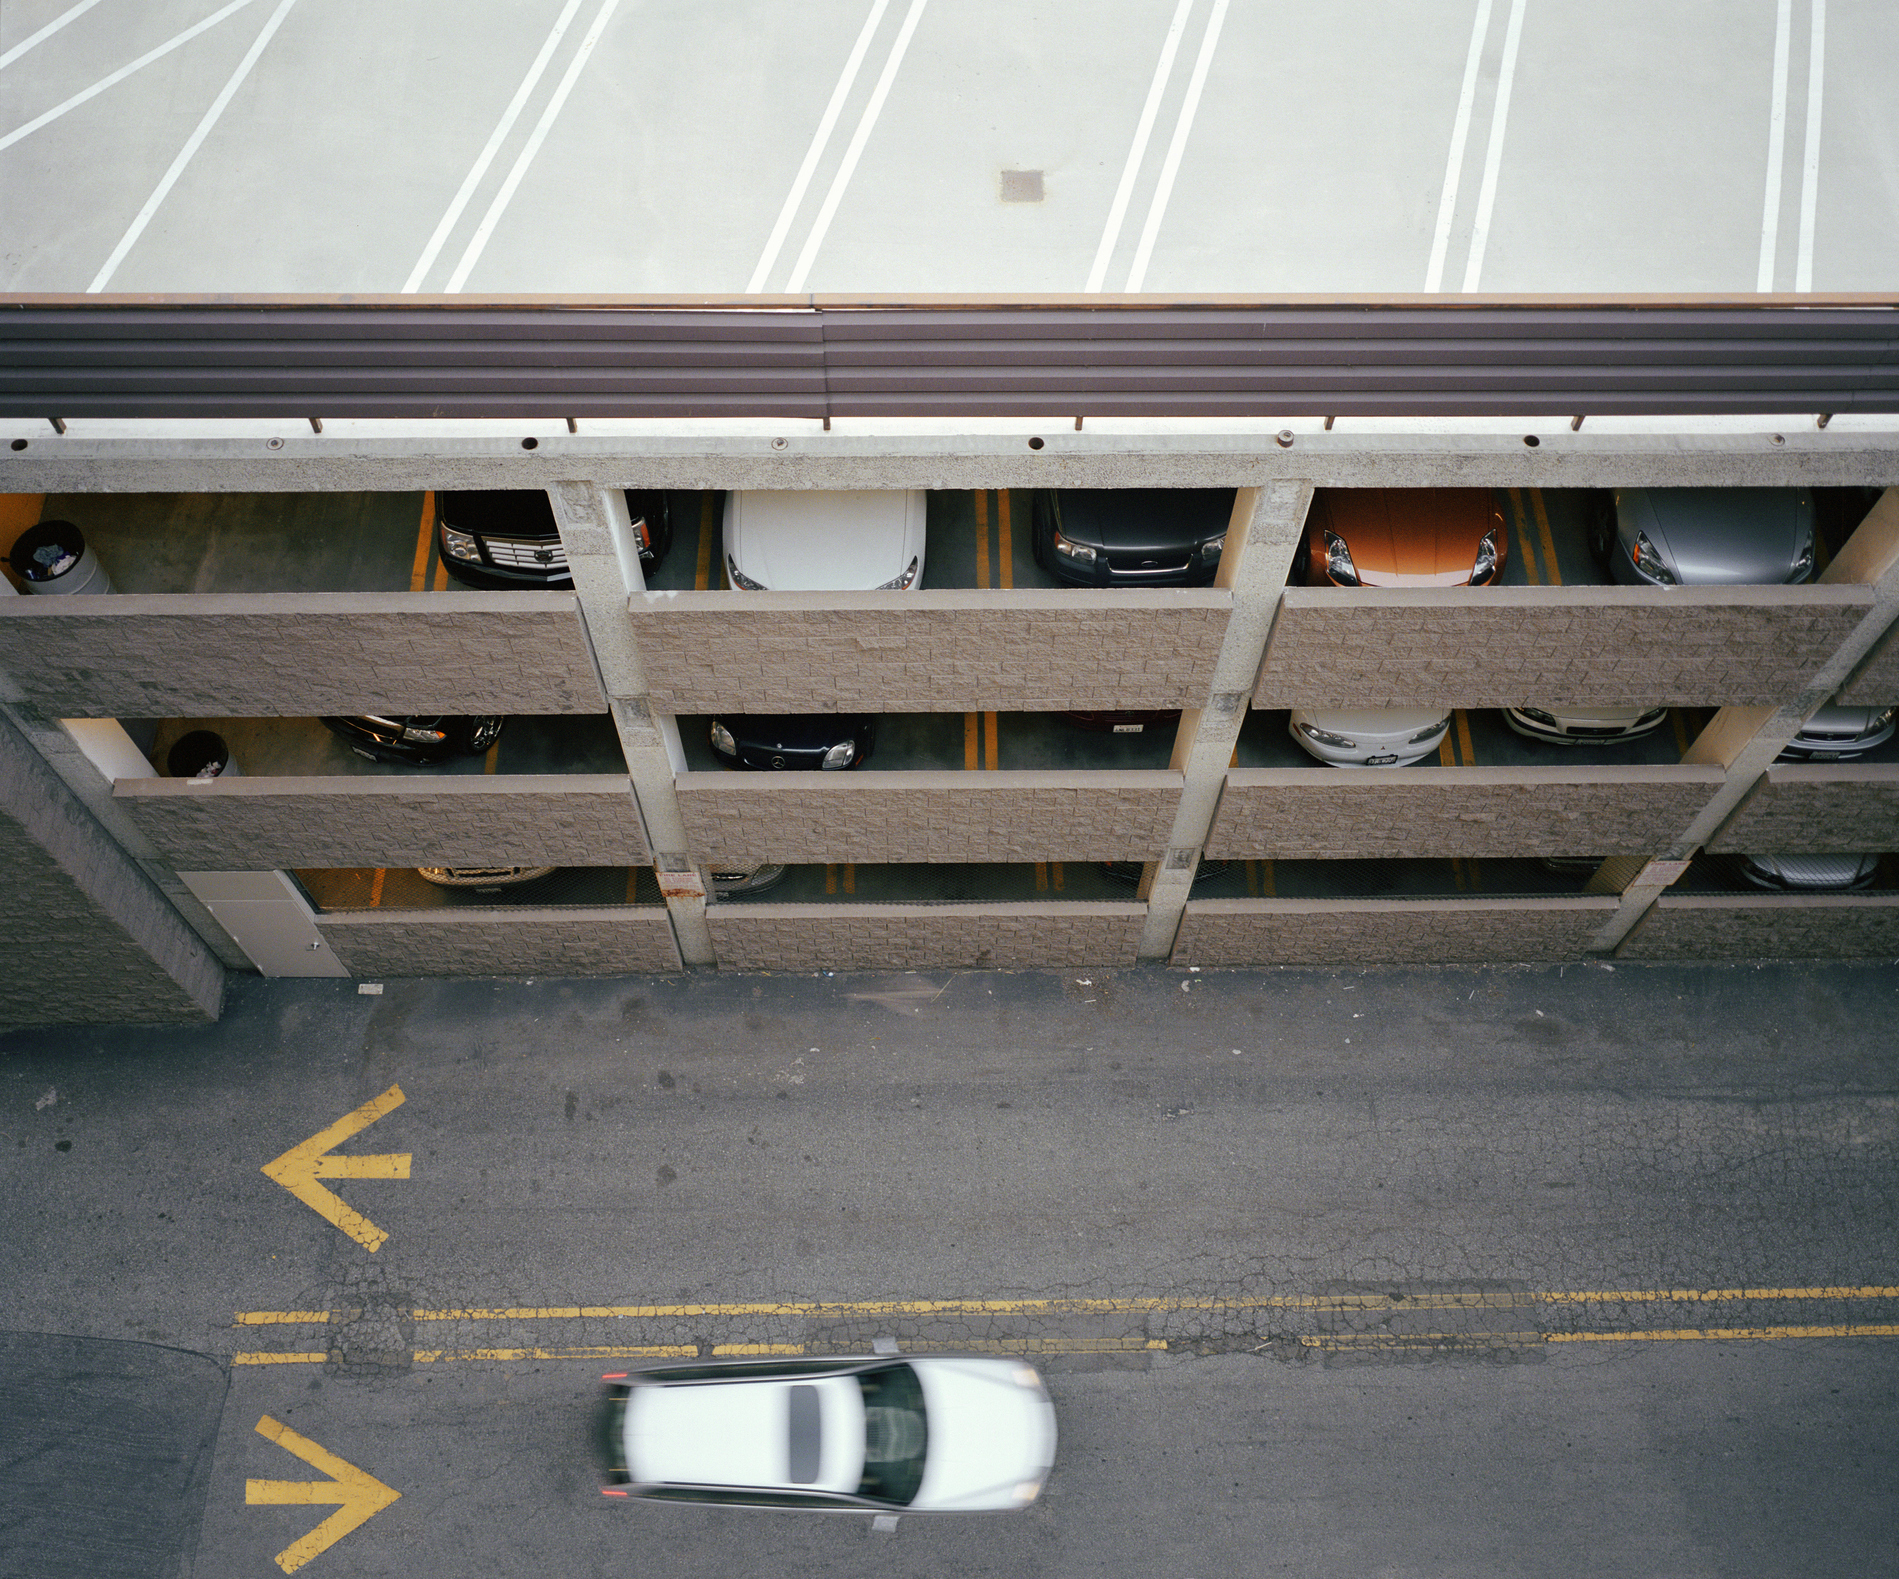 Car passing multi-story garage, overhead view (blurred motion)